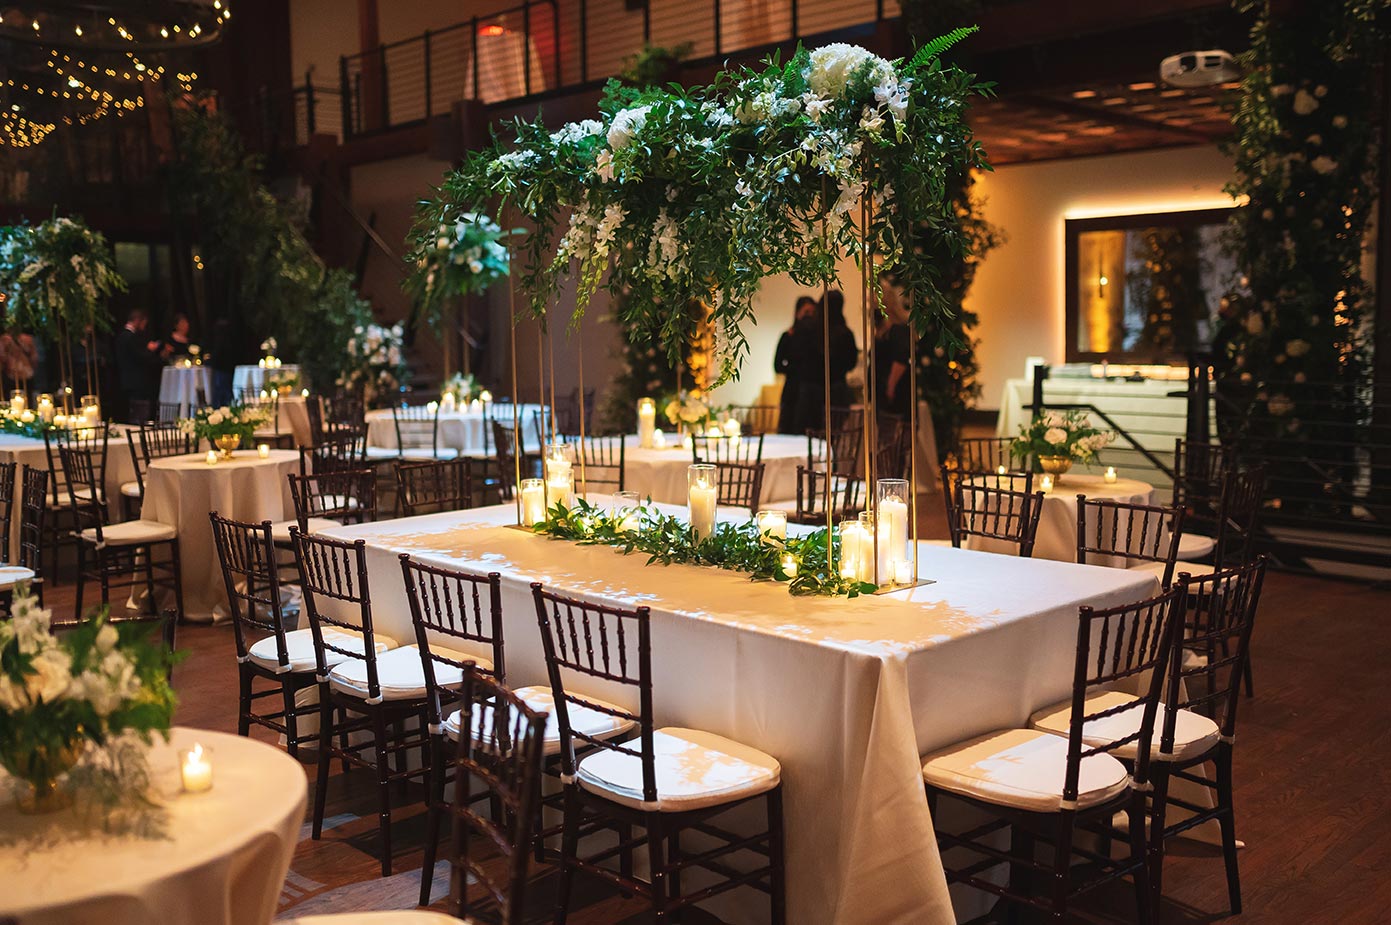 Wedding reception table with modern gold stand and tall rectangular arrangement with greenery and white flowers